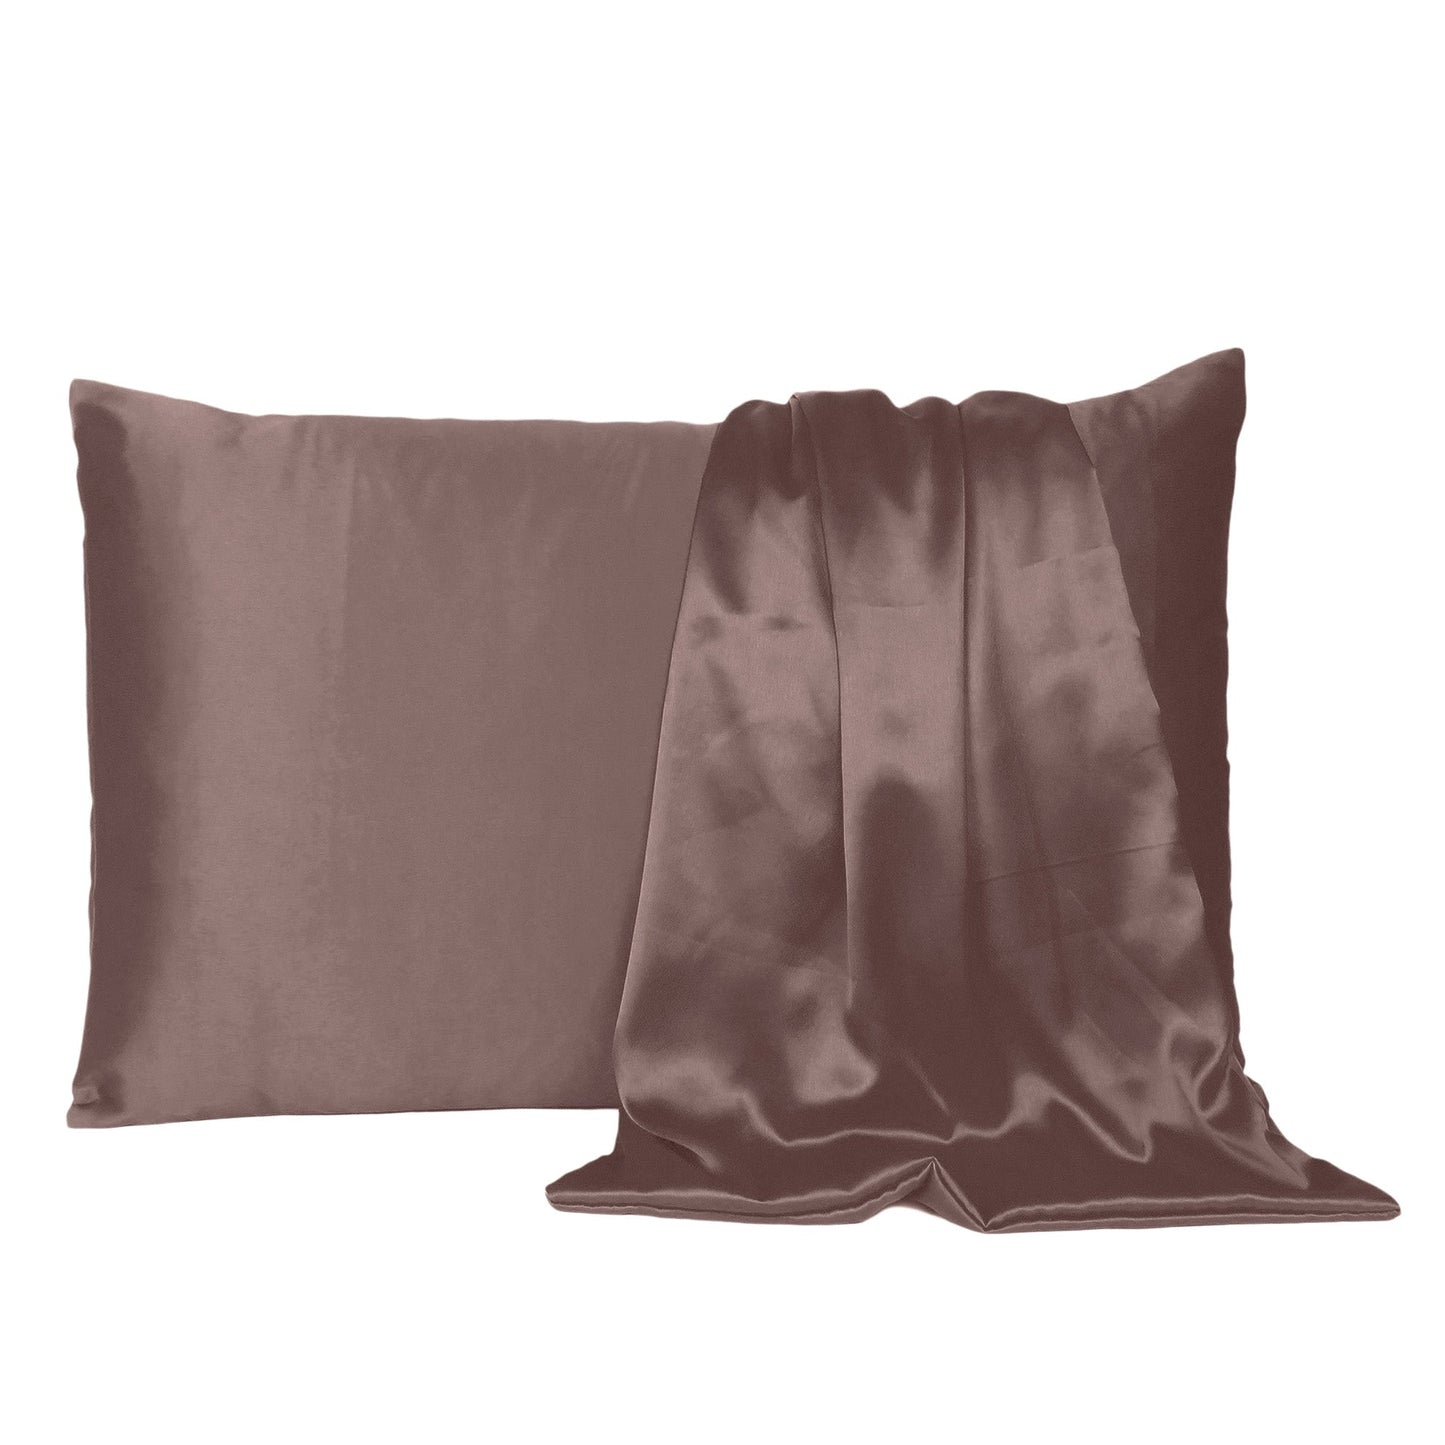 Luxury Soft Plain Satin Silk Pillowcases in Set of 2 - Withered Rose